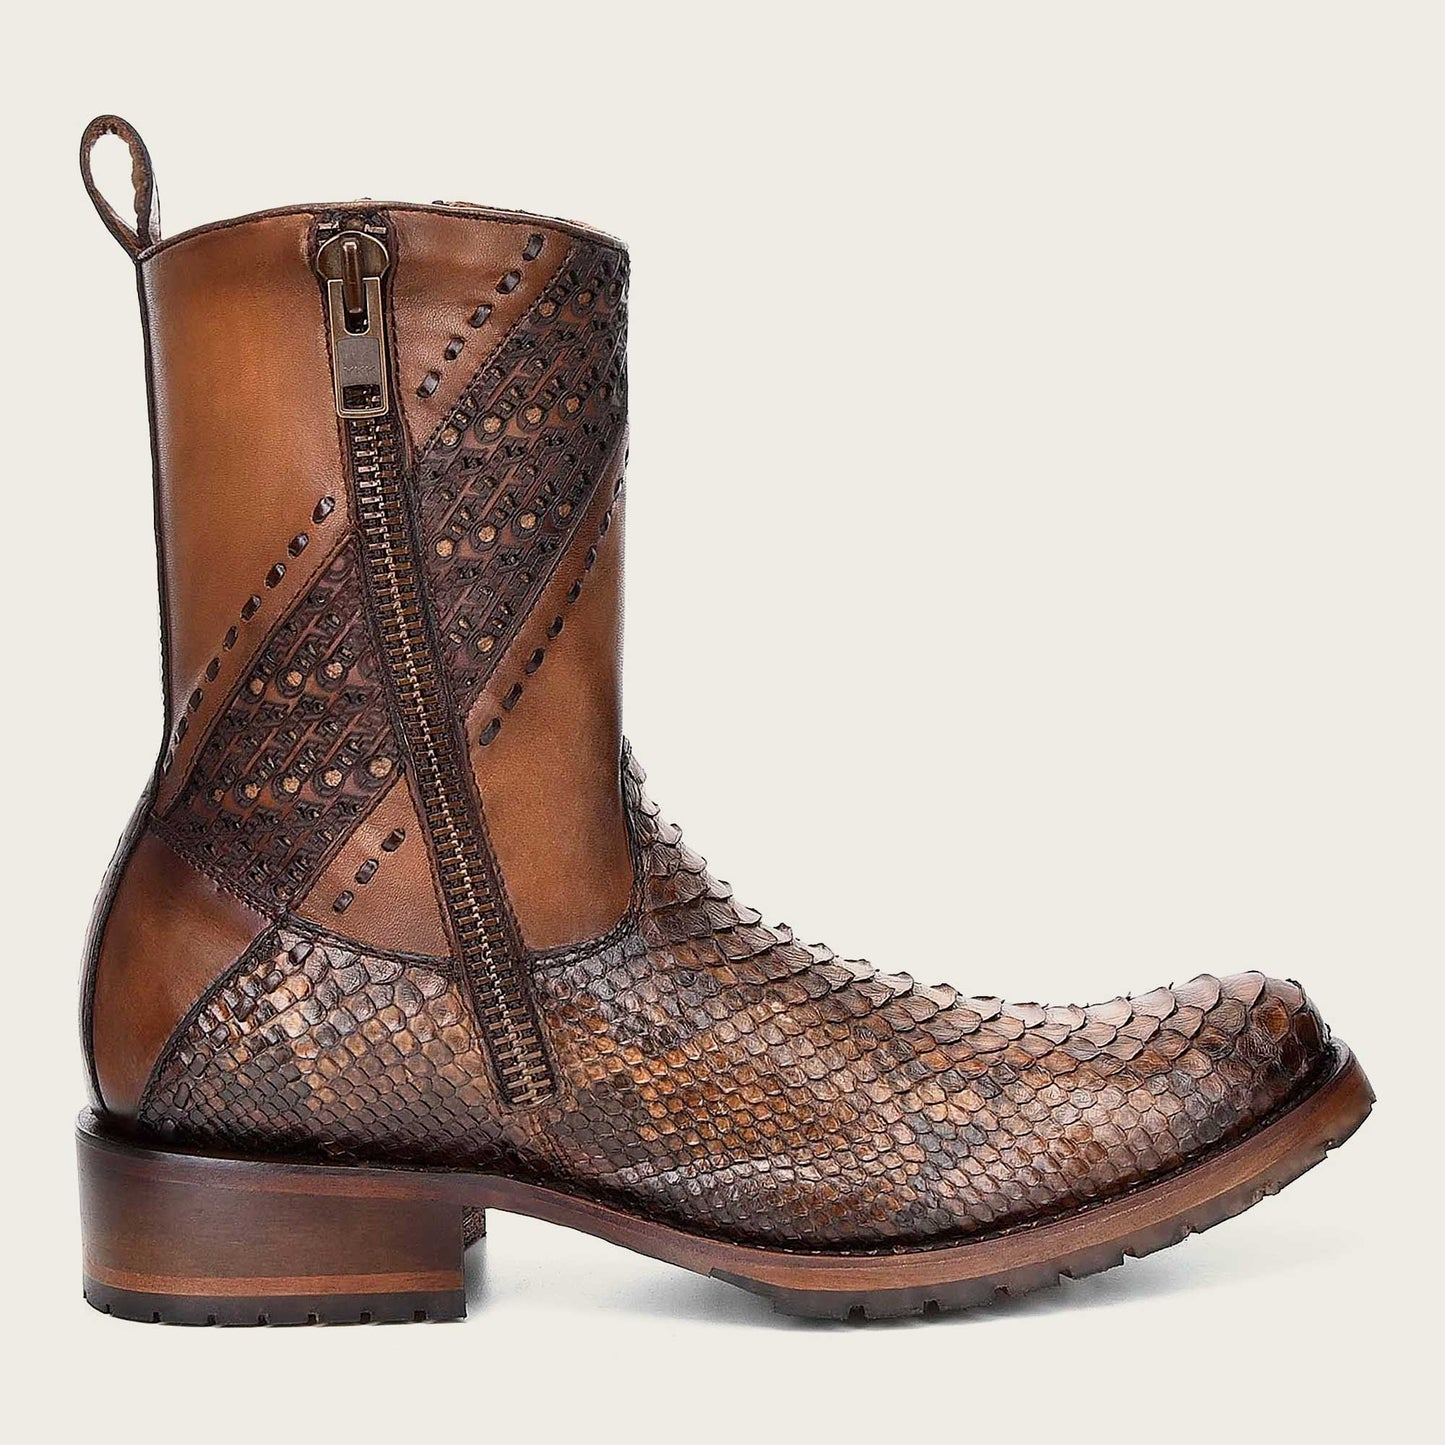 Step out in style with these engraved honey leather boots featuring intricate designs that add a touch of elegance and sophistication to your look.